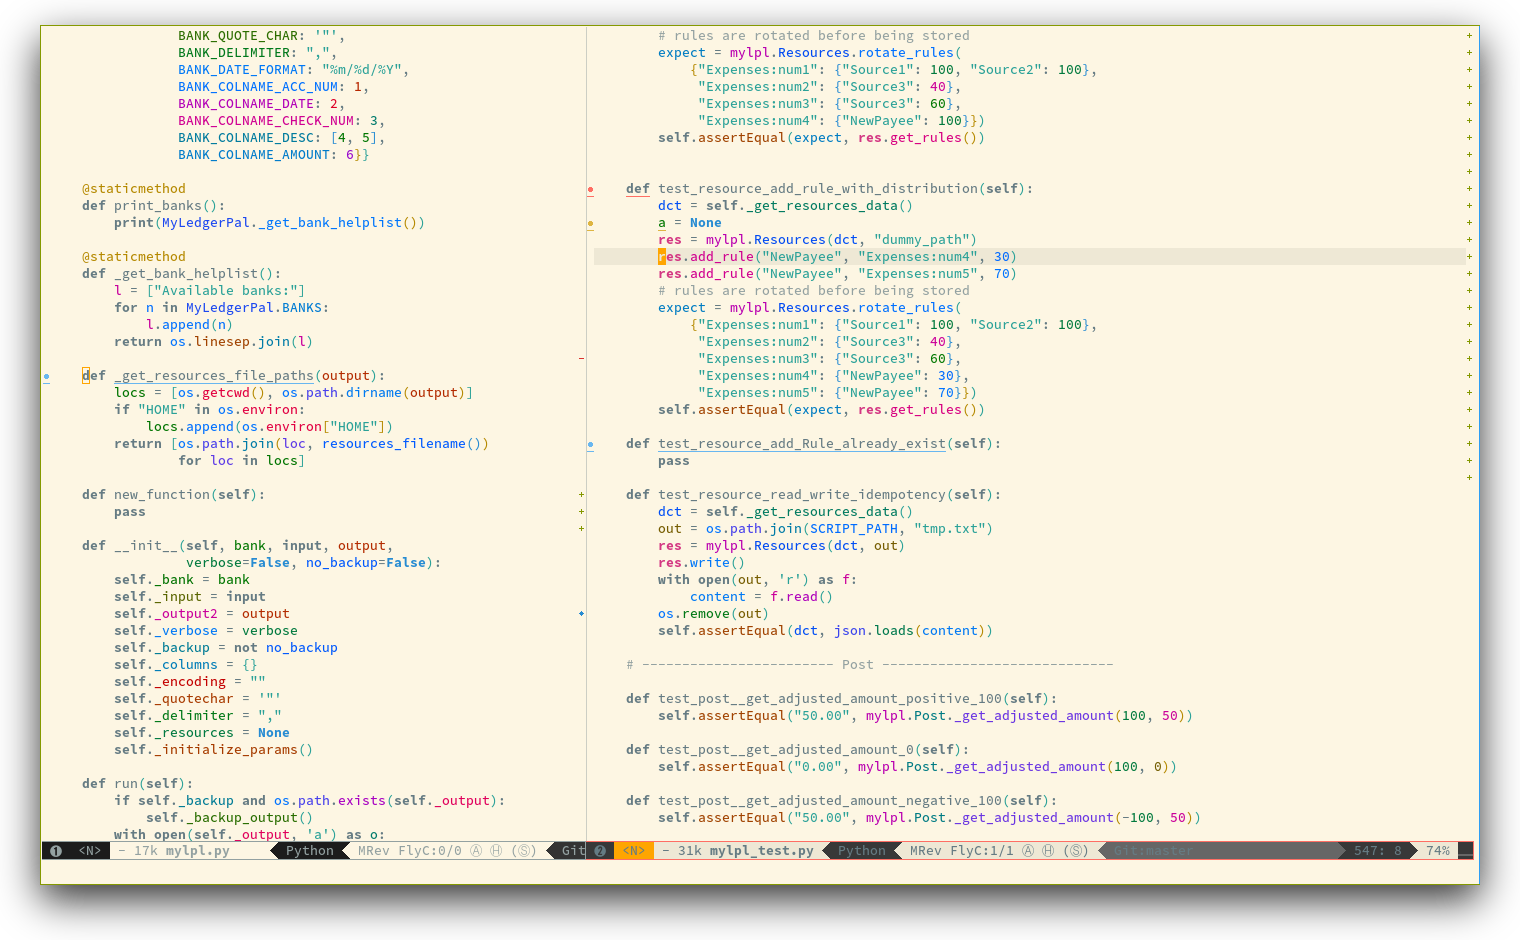 /TakeV/spacemacs/media/commit/9befd20a1a81da0b4b94c69e35951f907bee4615/layers/colors/img/theme-tweaks-python.png